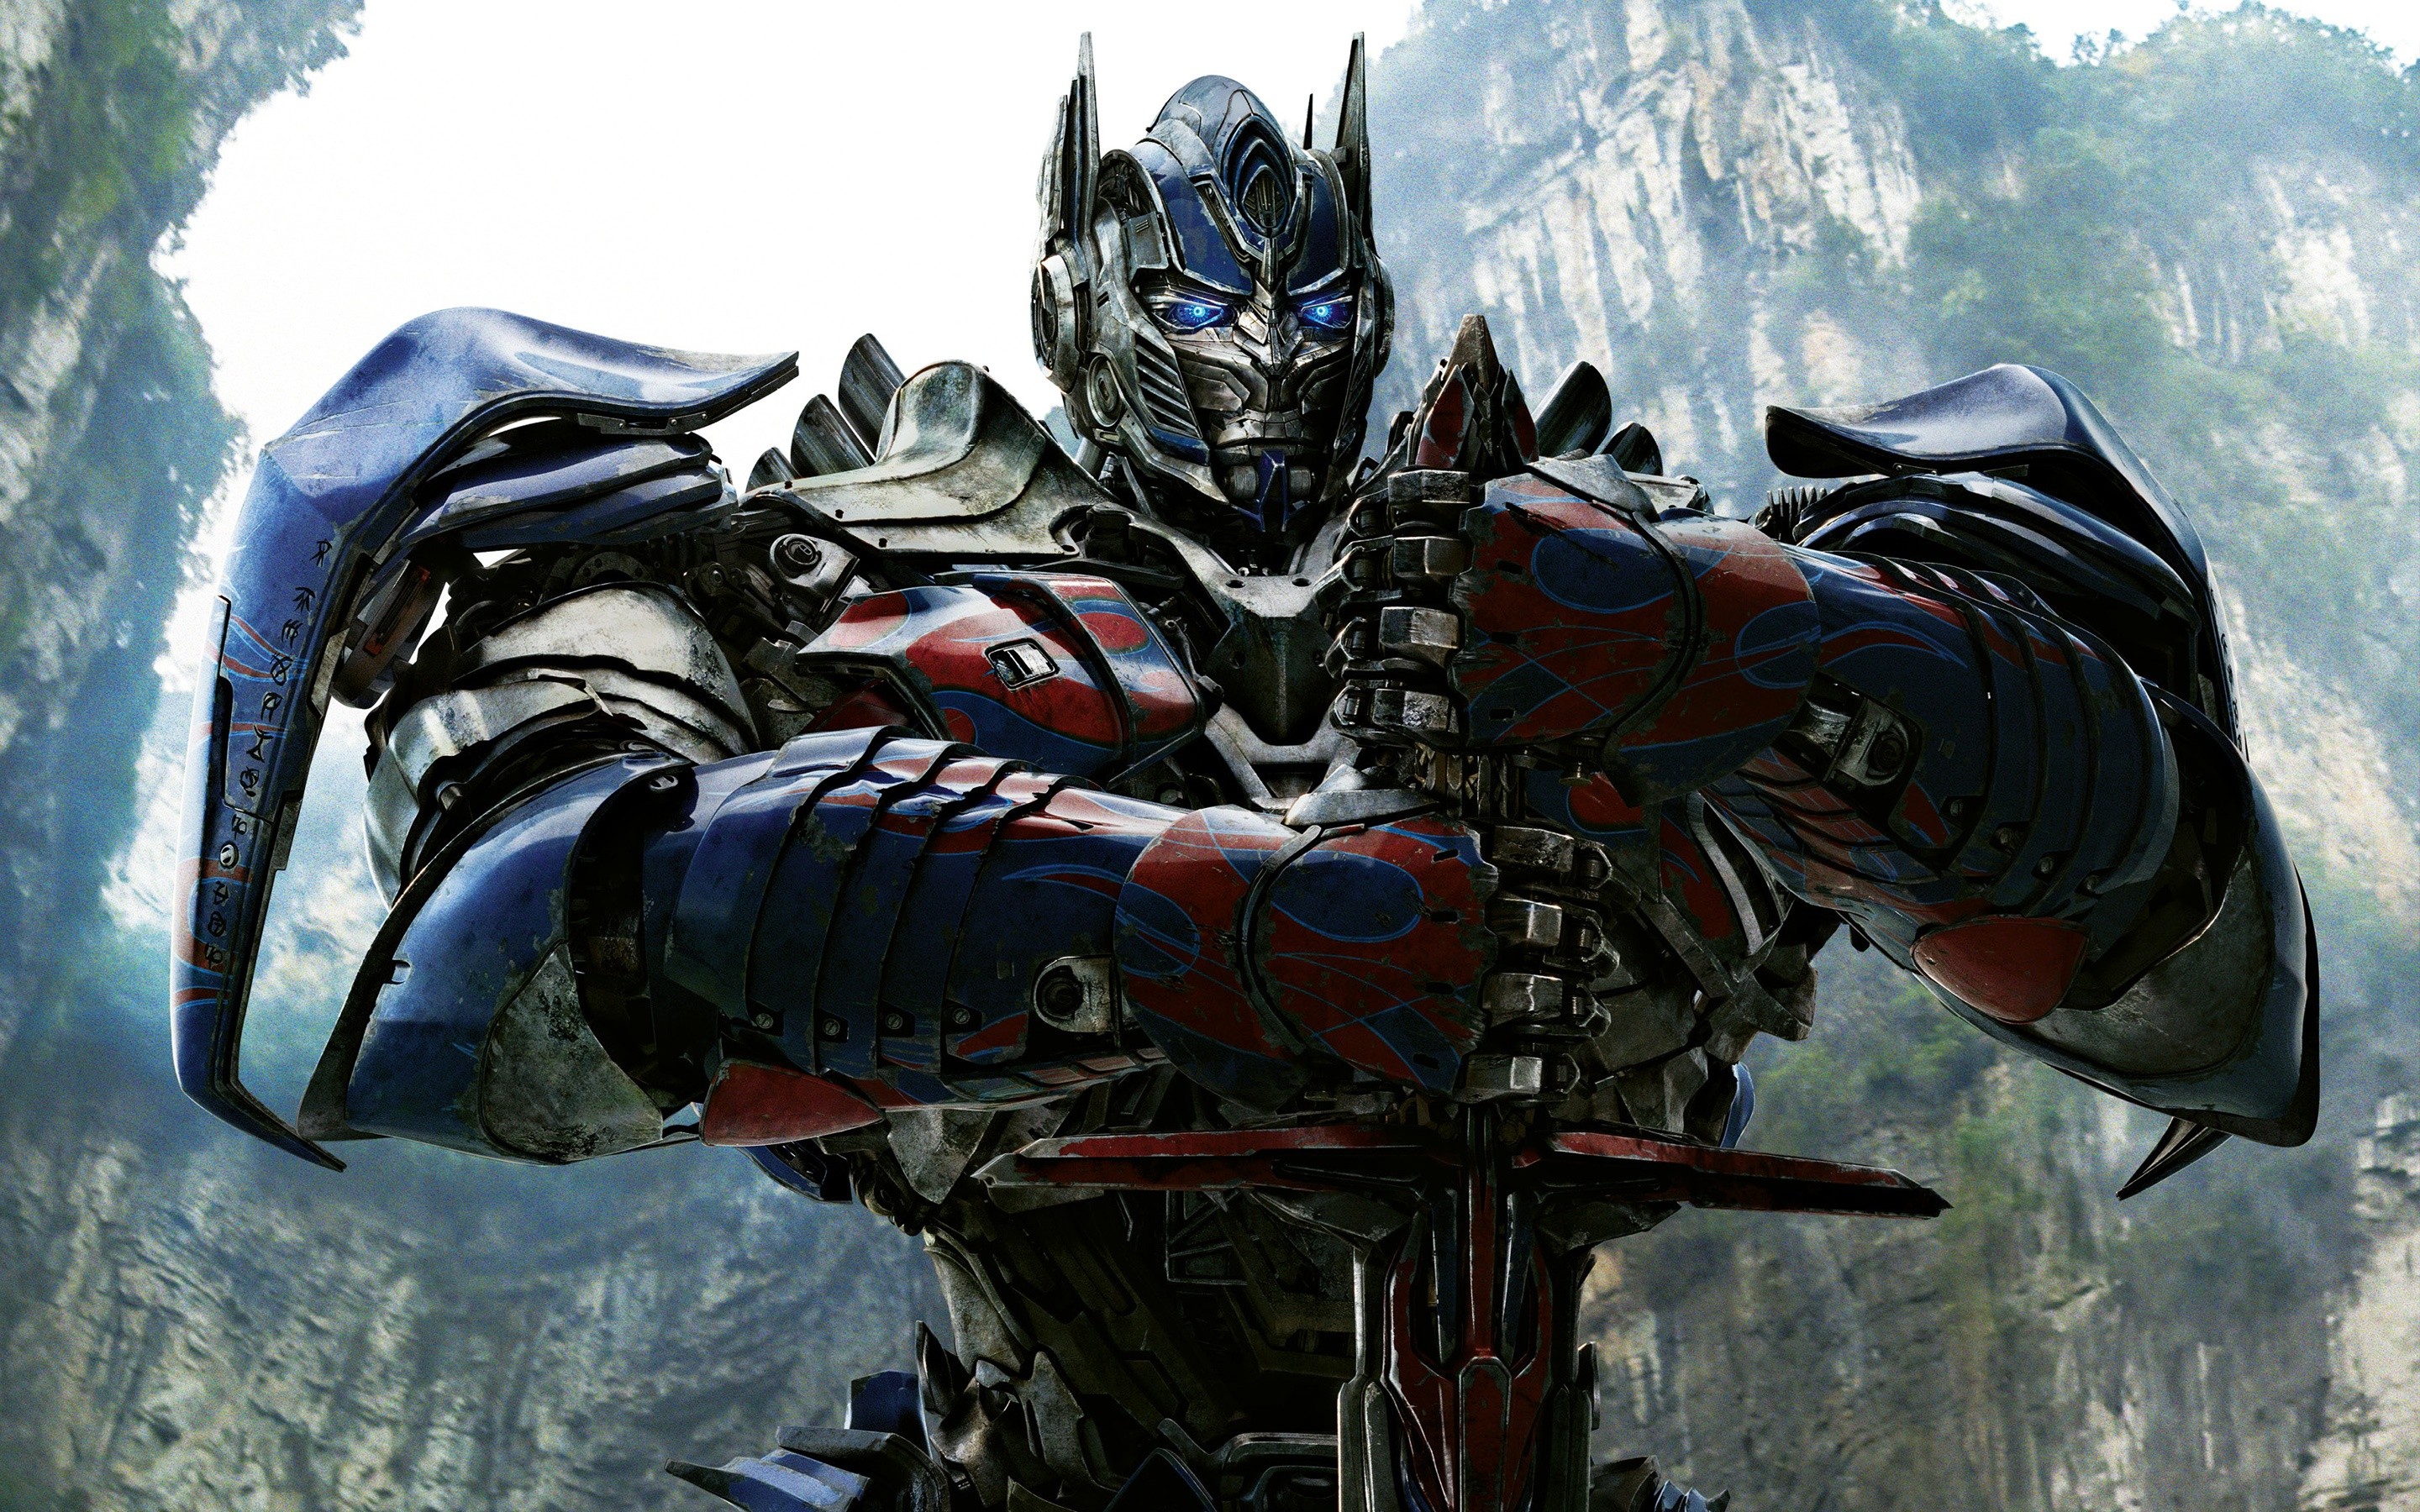 2880x1800 optimus prime in transformers 4 wallpapers high definition amazing cool  desktop wallpapers for windows mac tablet download free 2880Ã1800 Wallpaper  HD